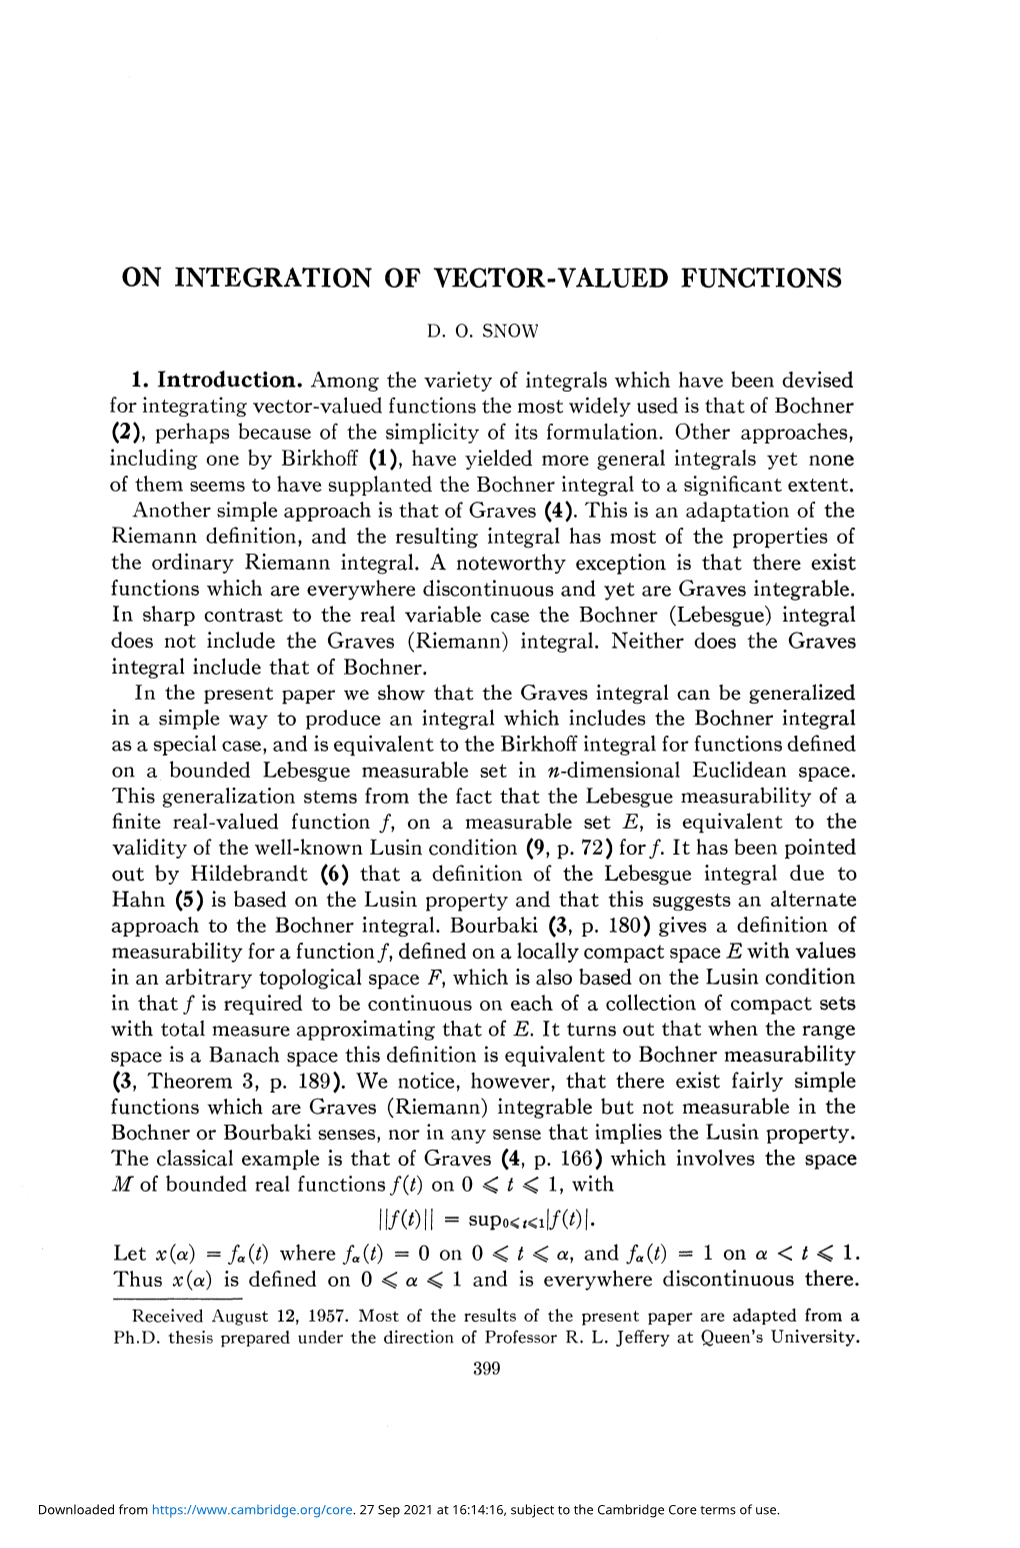 On Integration of Vector-Valued Functions